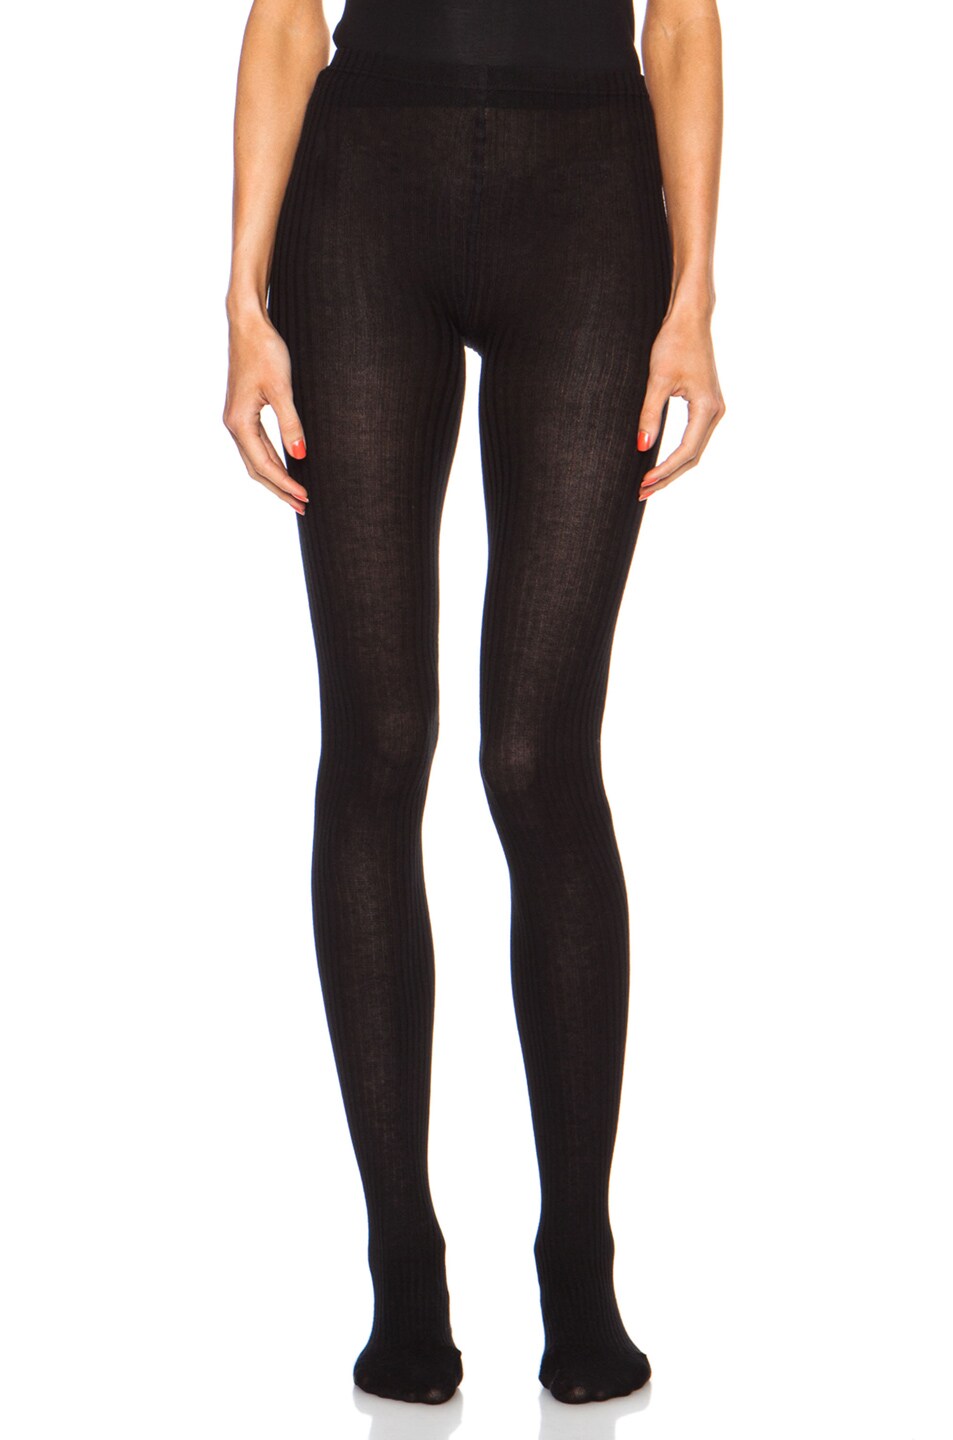 Image 1 of A.P.C. Island Cotton-Blend Tights in Black